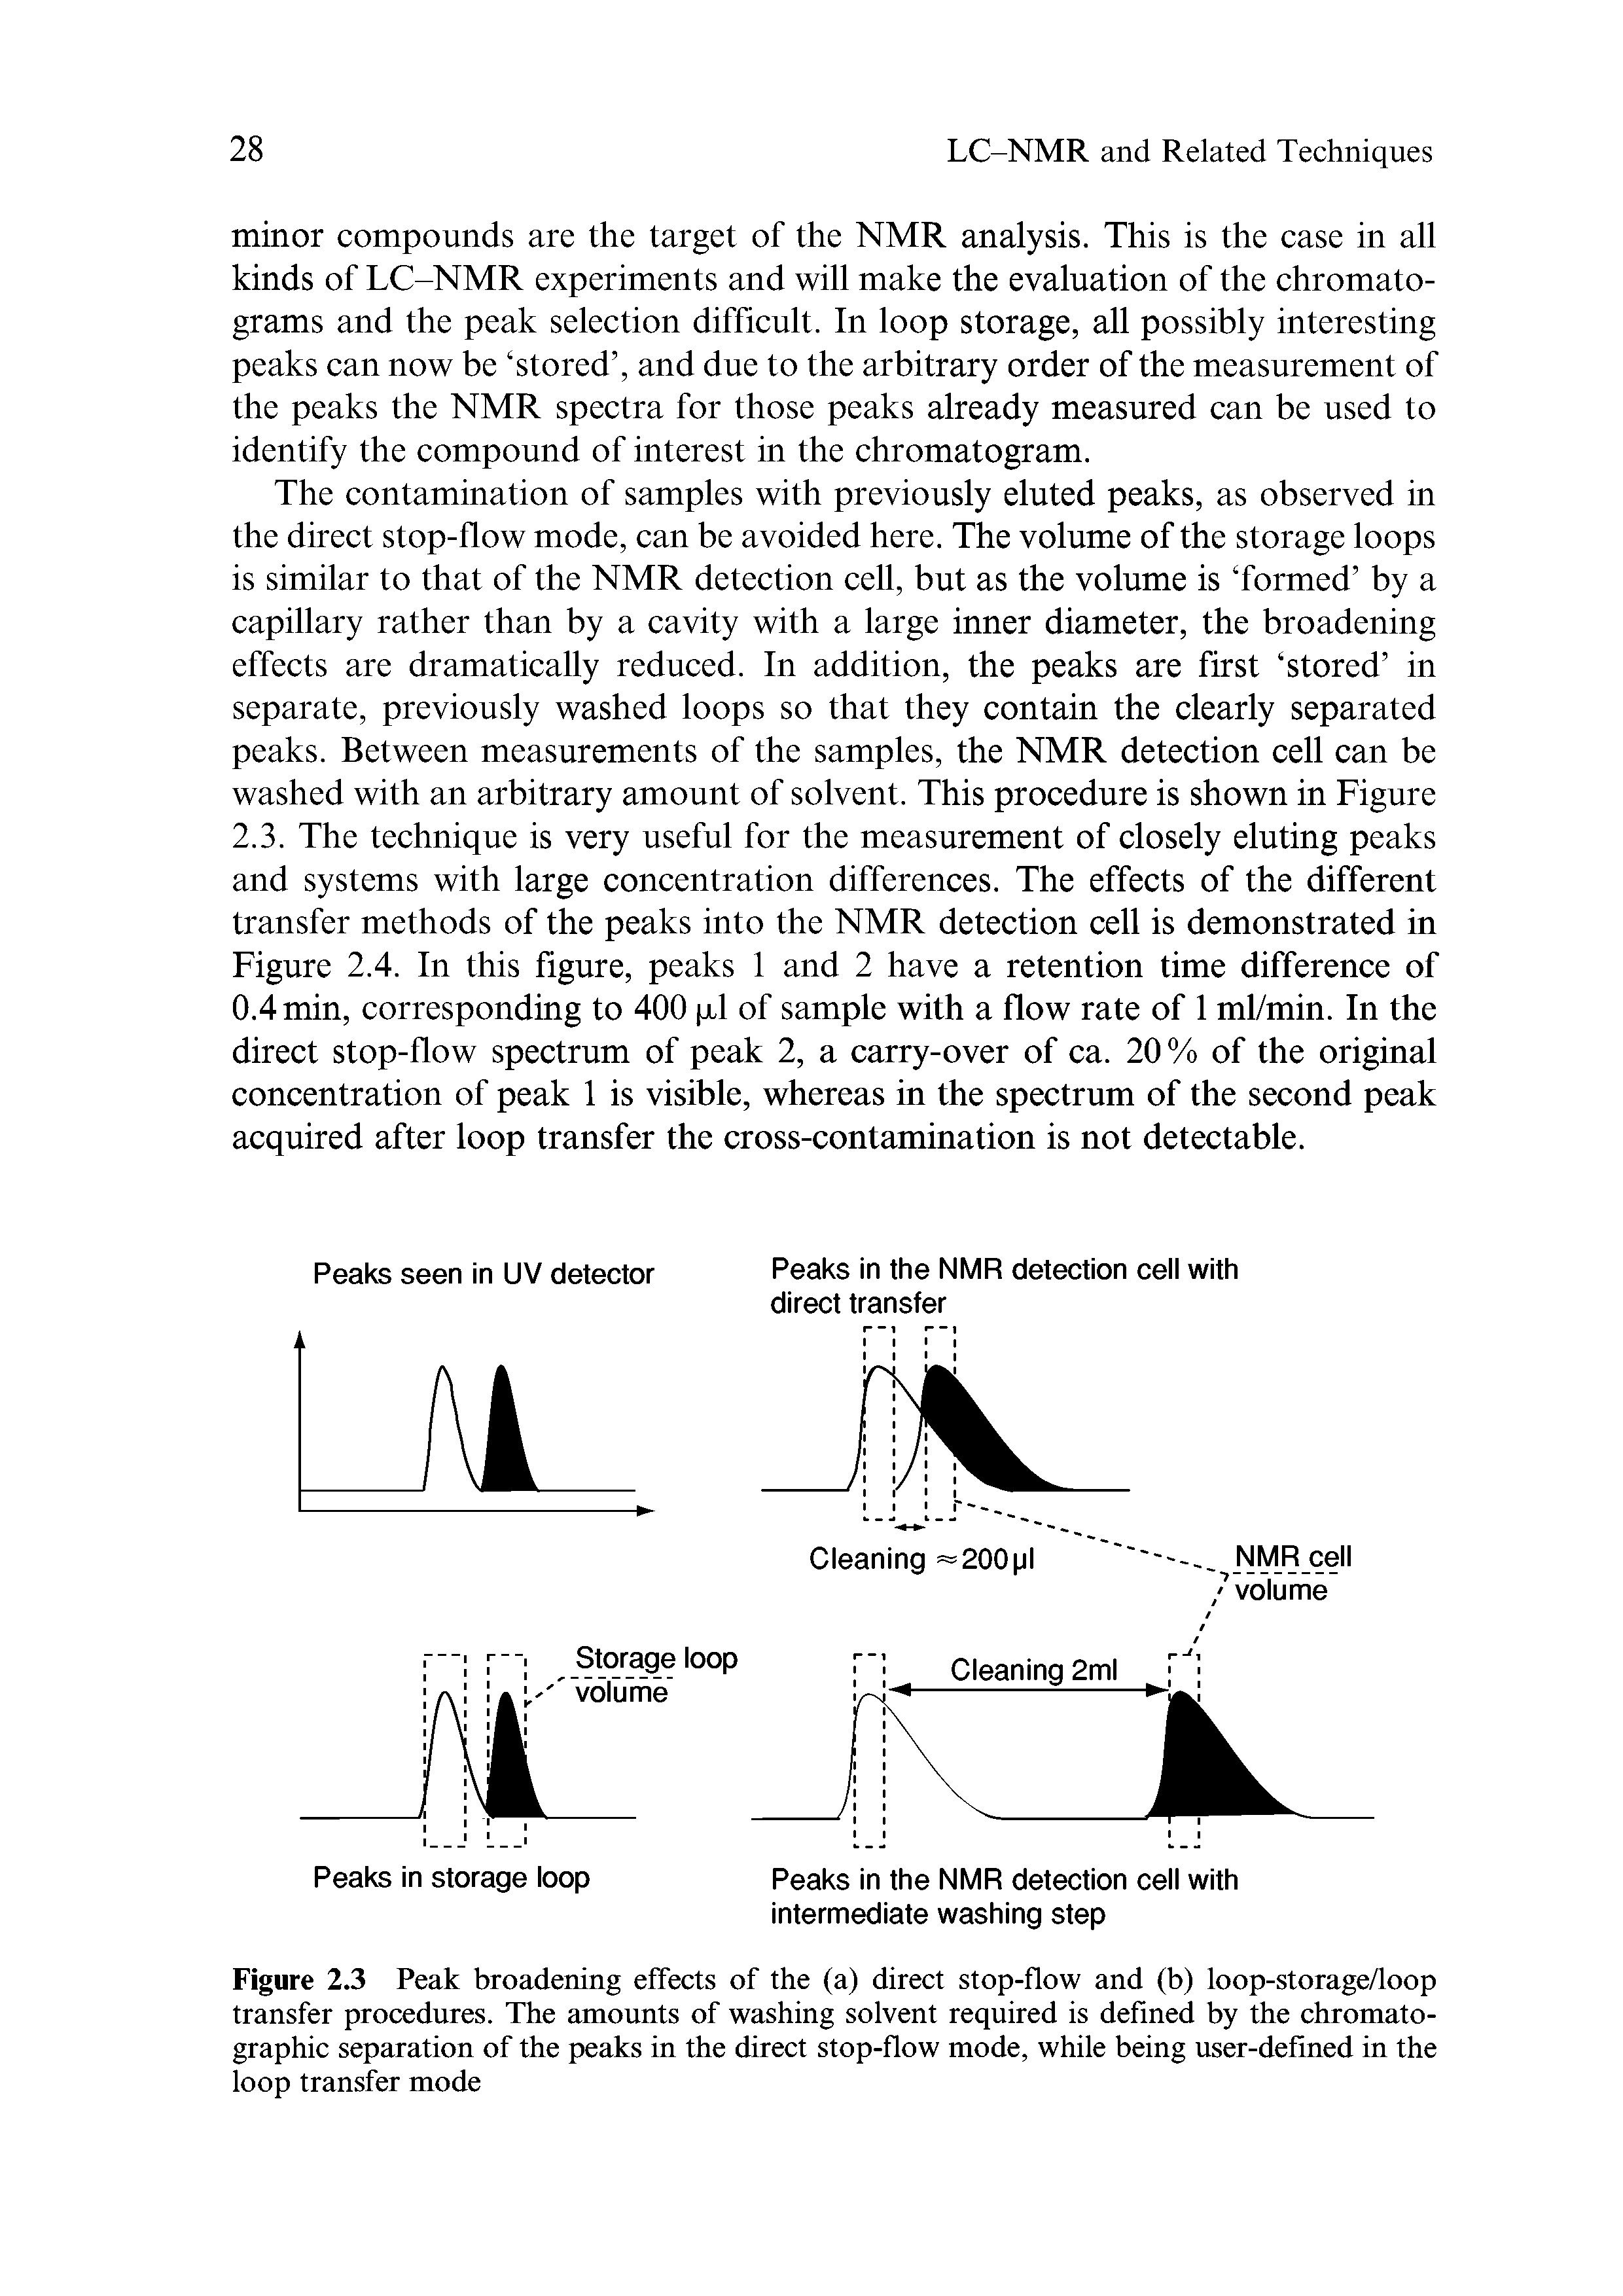 Figure 2.3 Peak broadening effects of the (a) direct stop-flow and (b) loop-storage/loop transfer procedures. The amounts of washing solvent required is defined by the chromatographic separation of the peaks in the direct stop-flow mode, while being user-defined in the loop transfer mode...